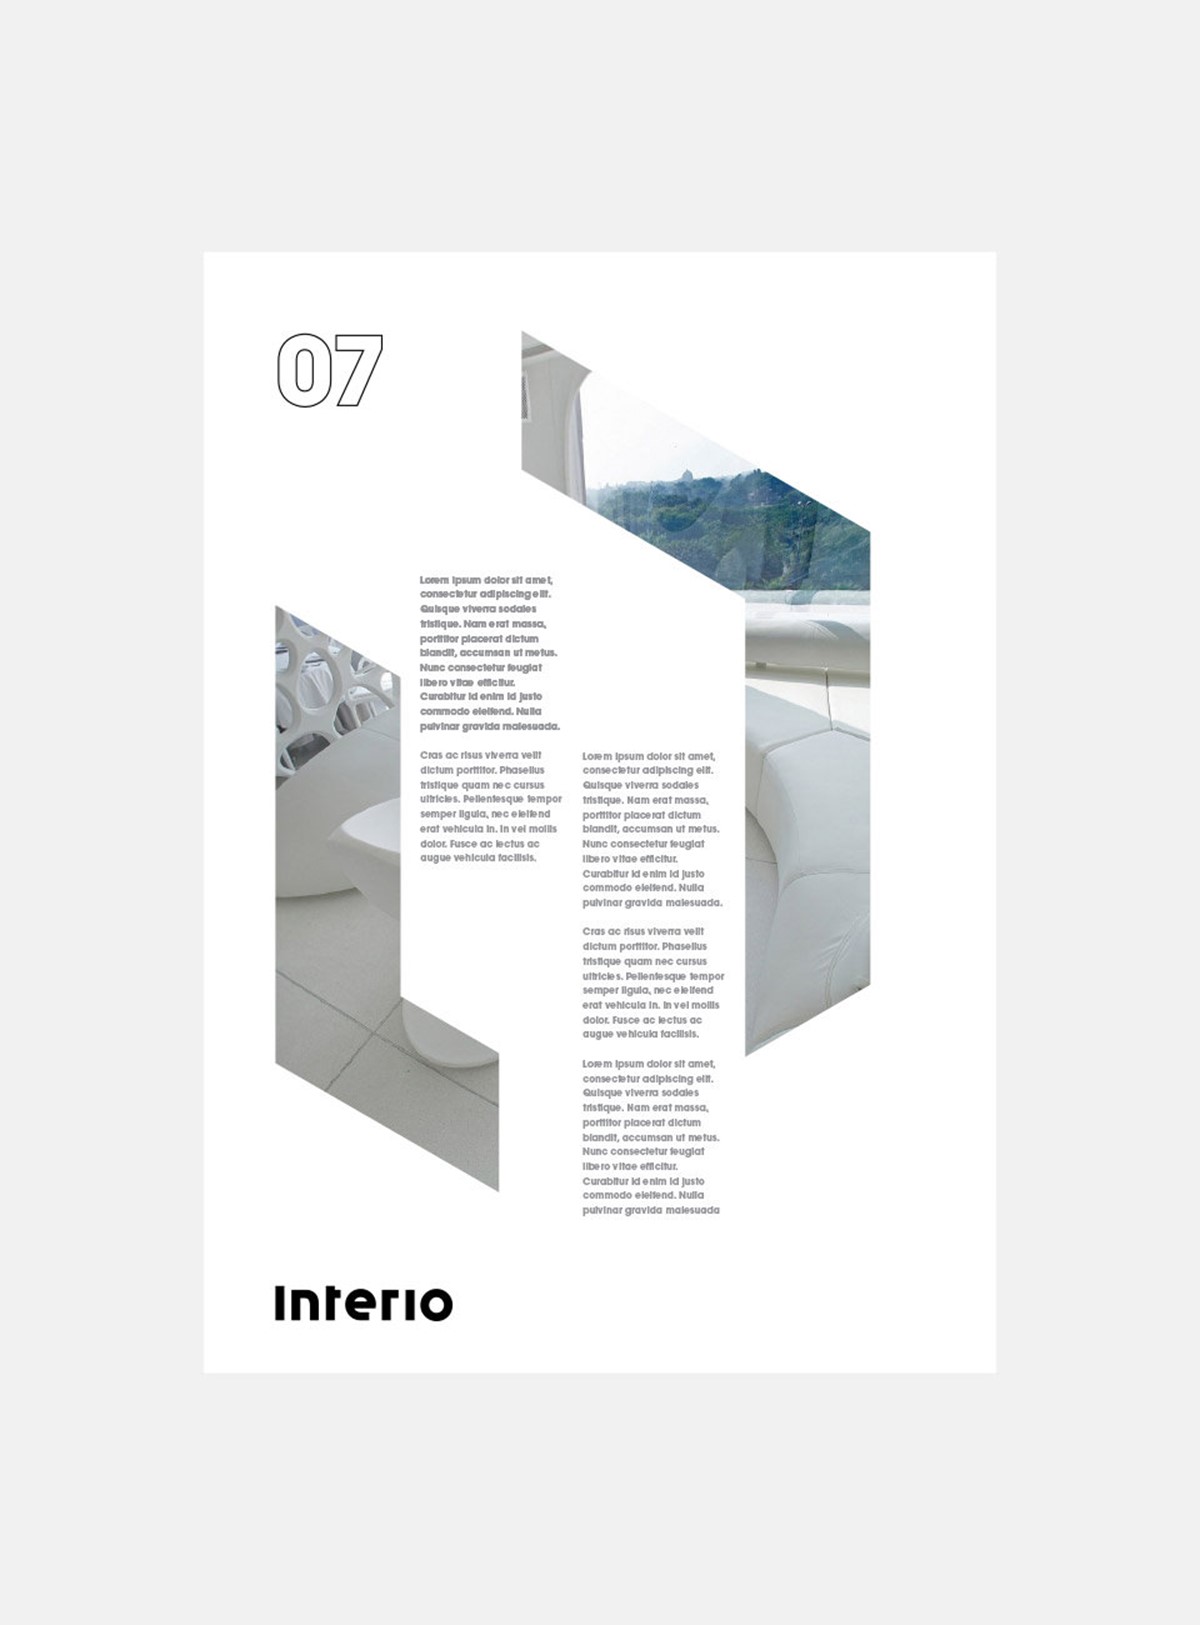 Interio. Brochure layout mock-up. Brand identity design by Superfried.